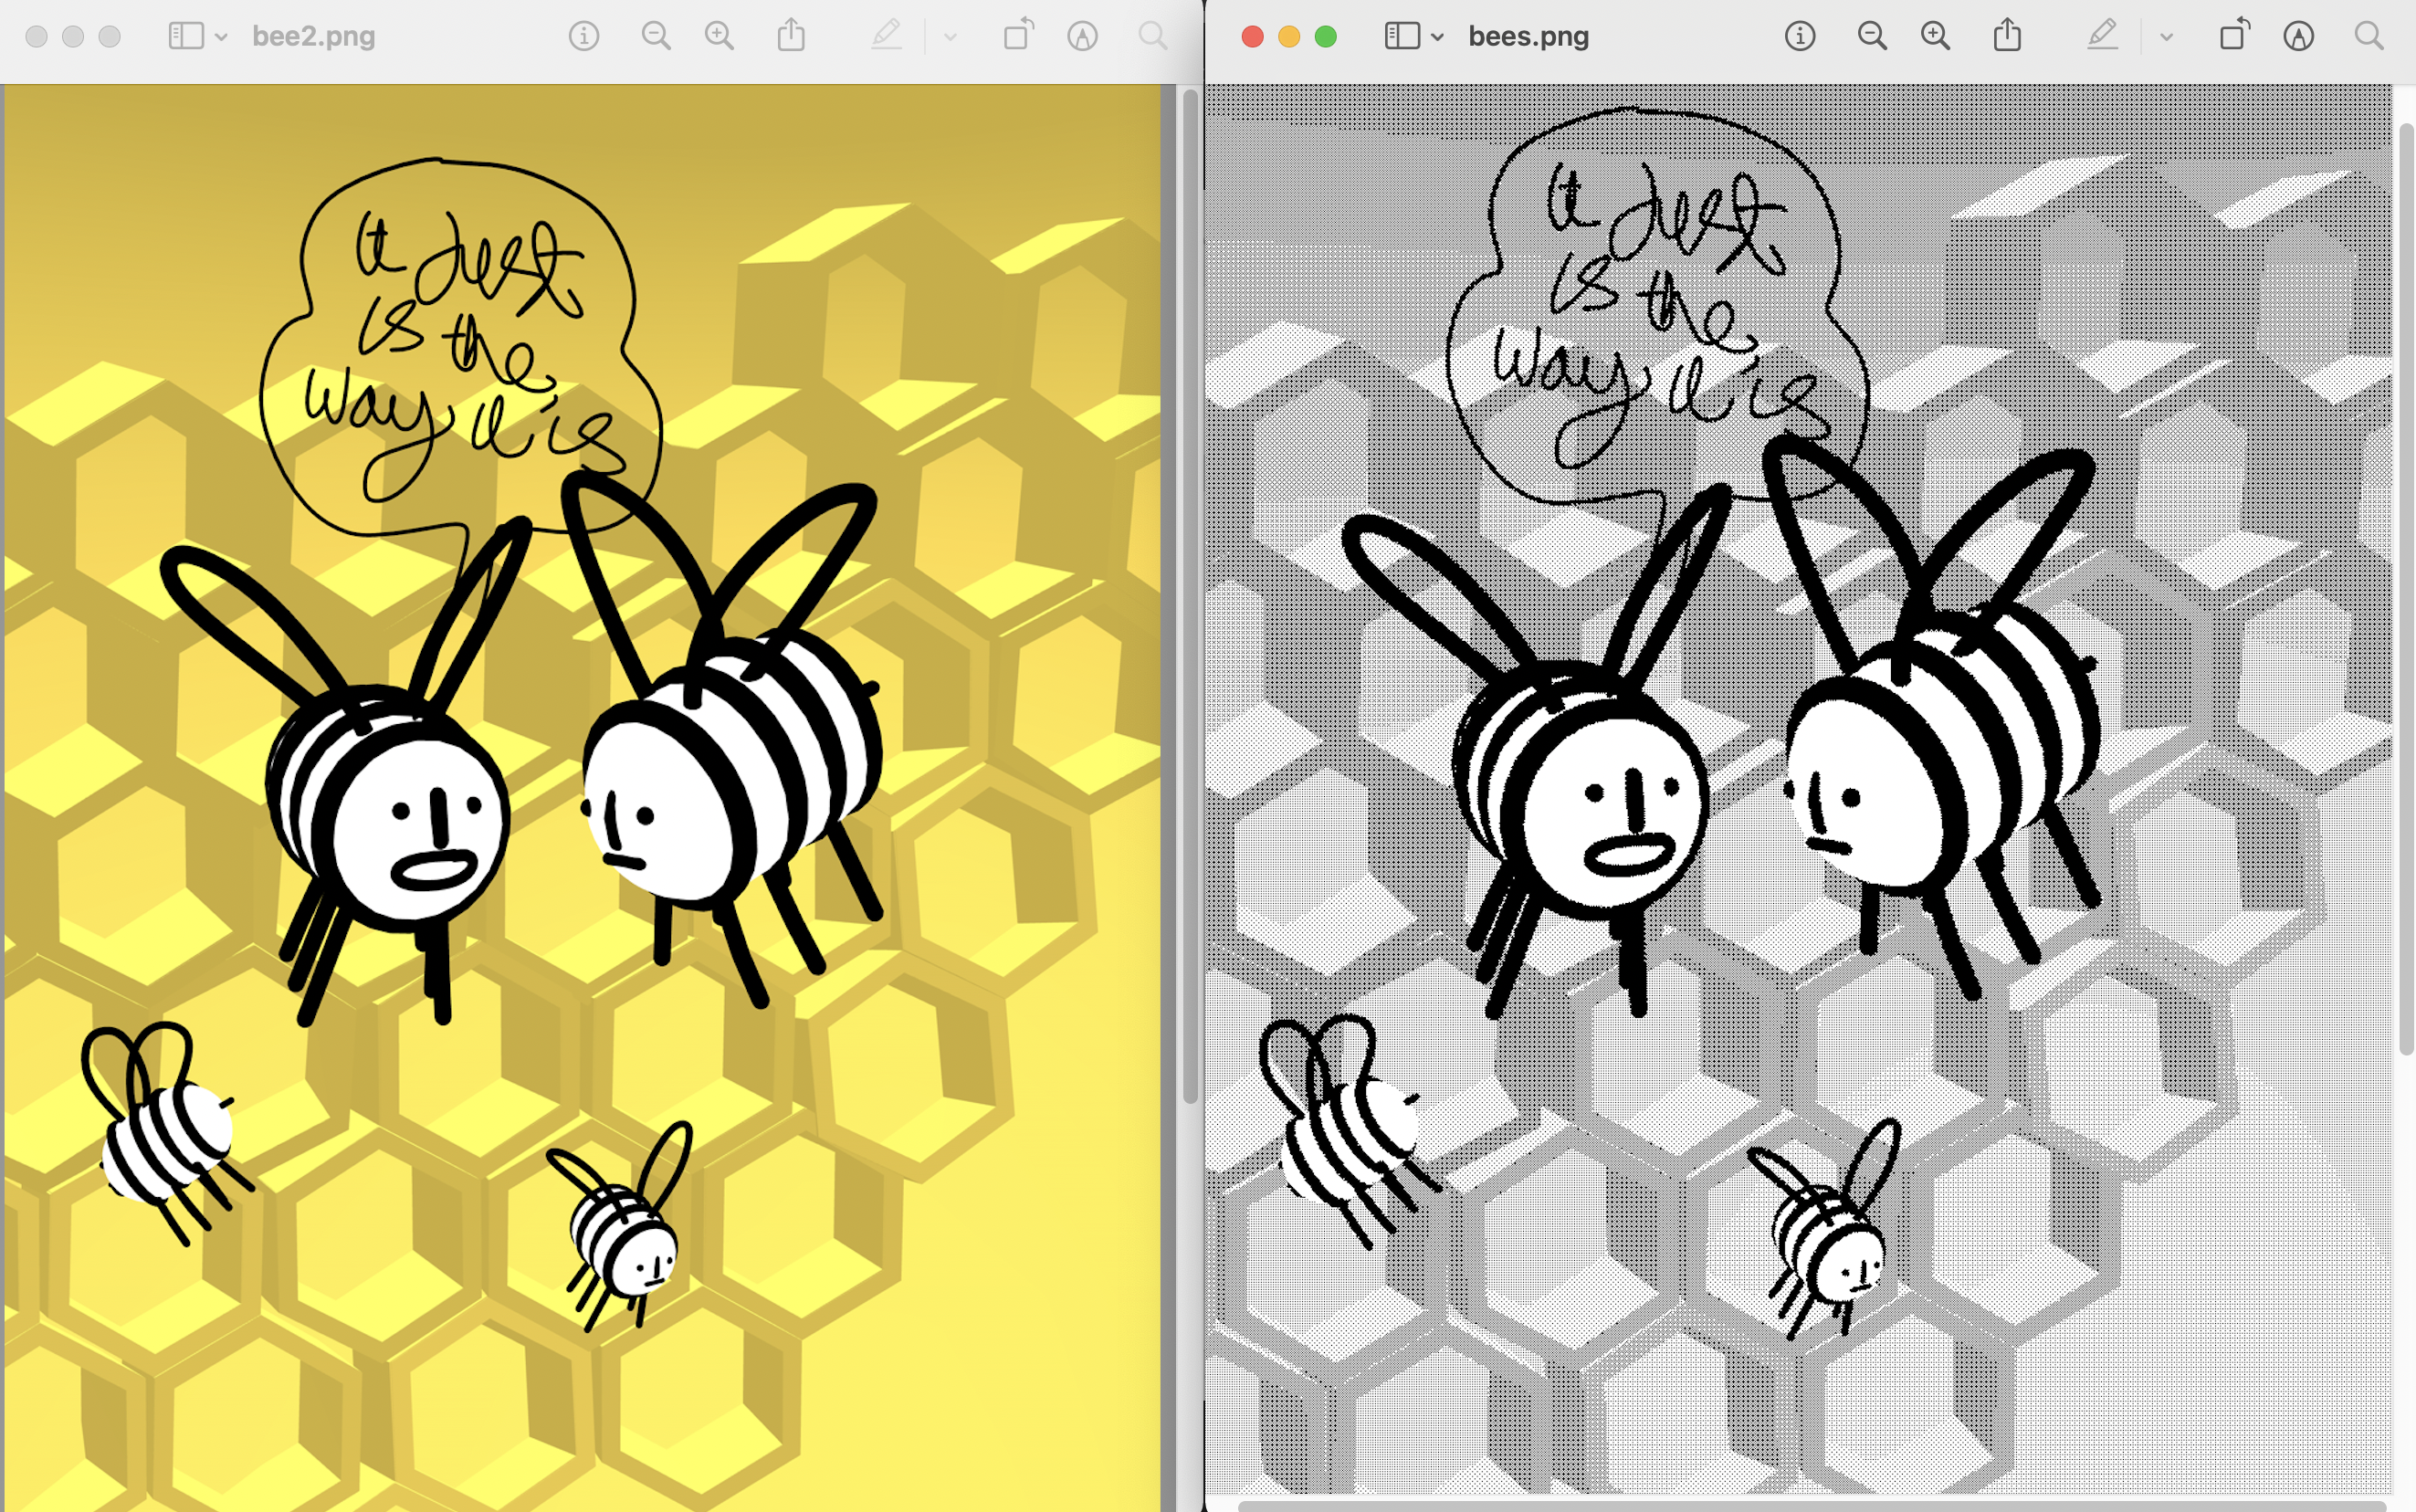 a picture of some a cartoon bees, and the same picture with black and white dithering